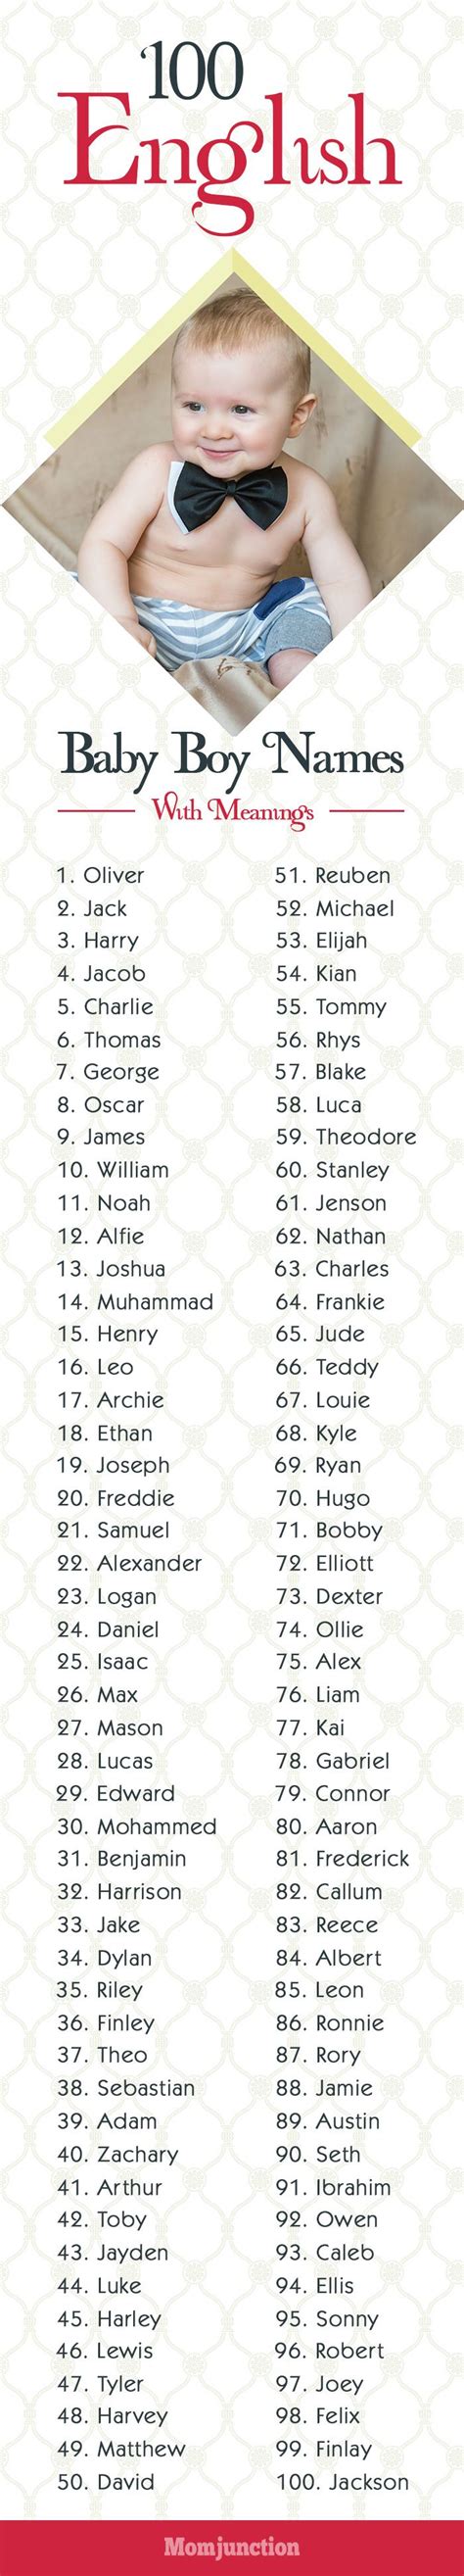 English Names For Baby Boy And Their Meaning Baby Viewer